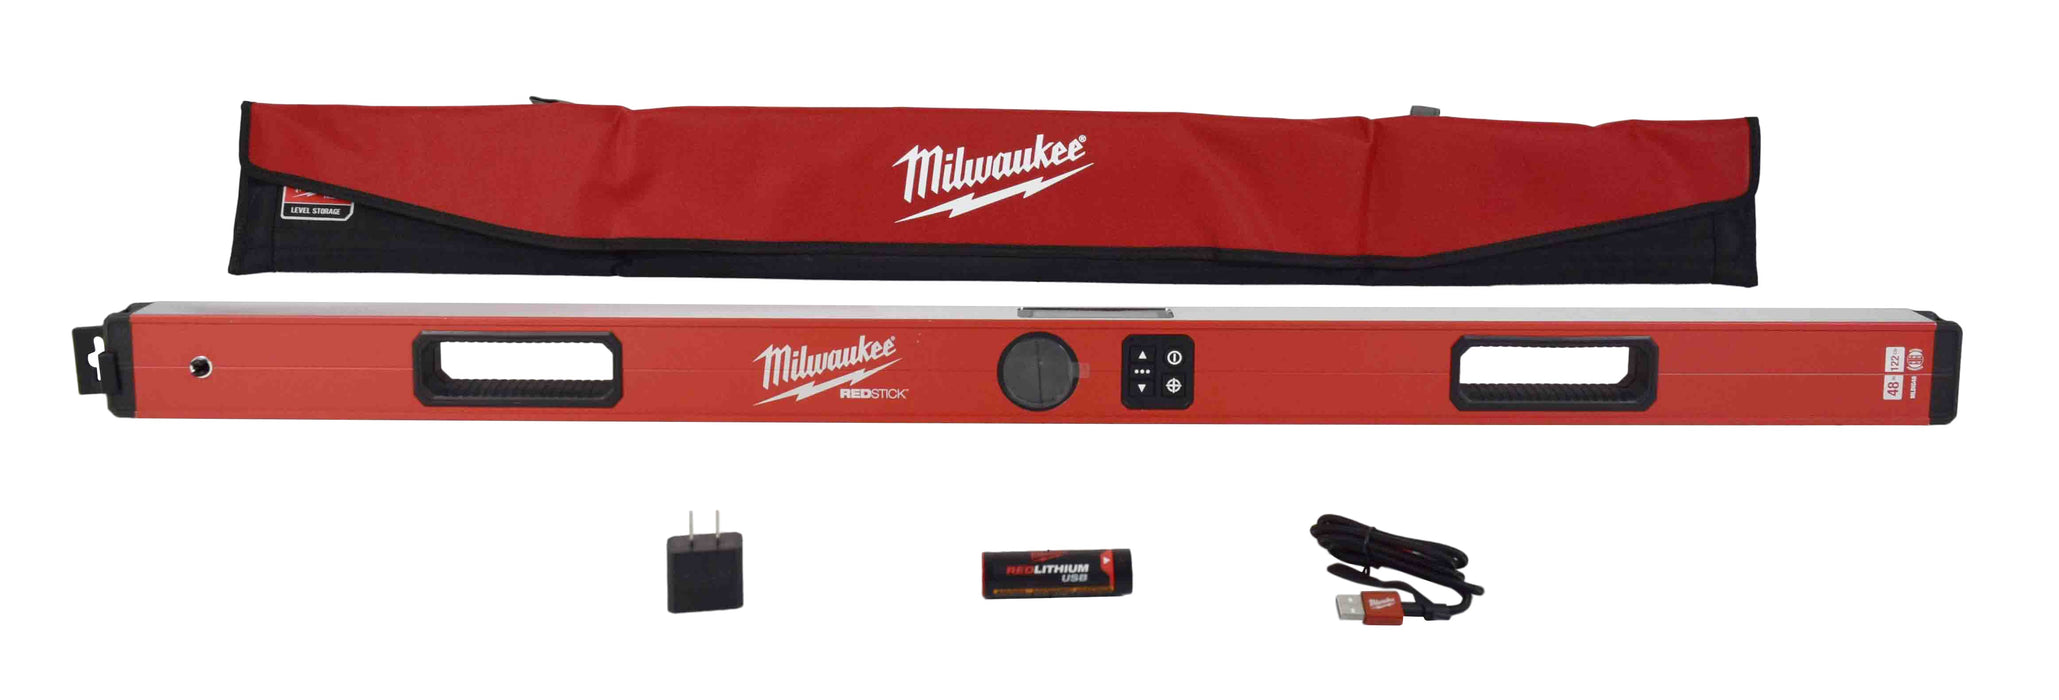 Milwaukee 48 in. REDSTICK™ Digital Level with PINPOINT™ Measurement Technology